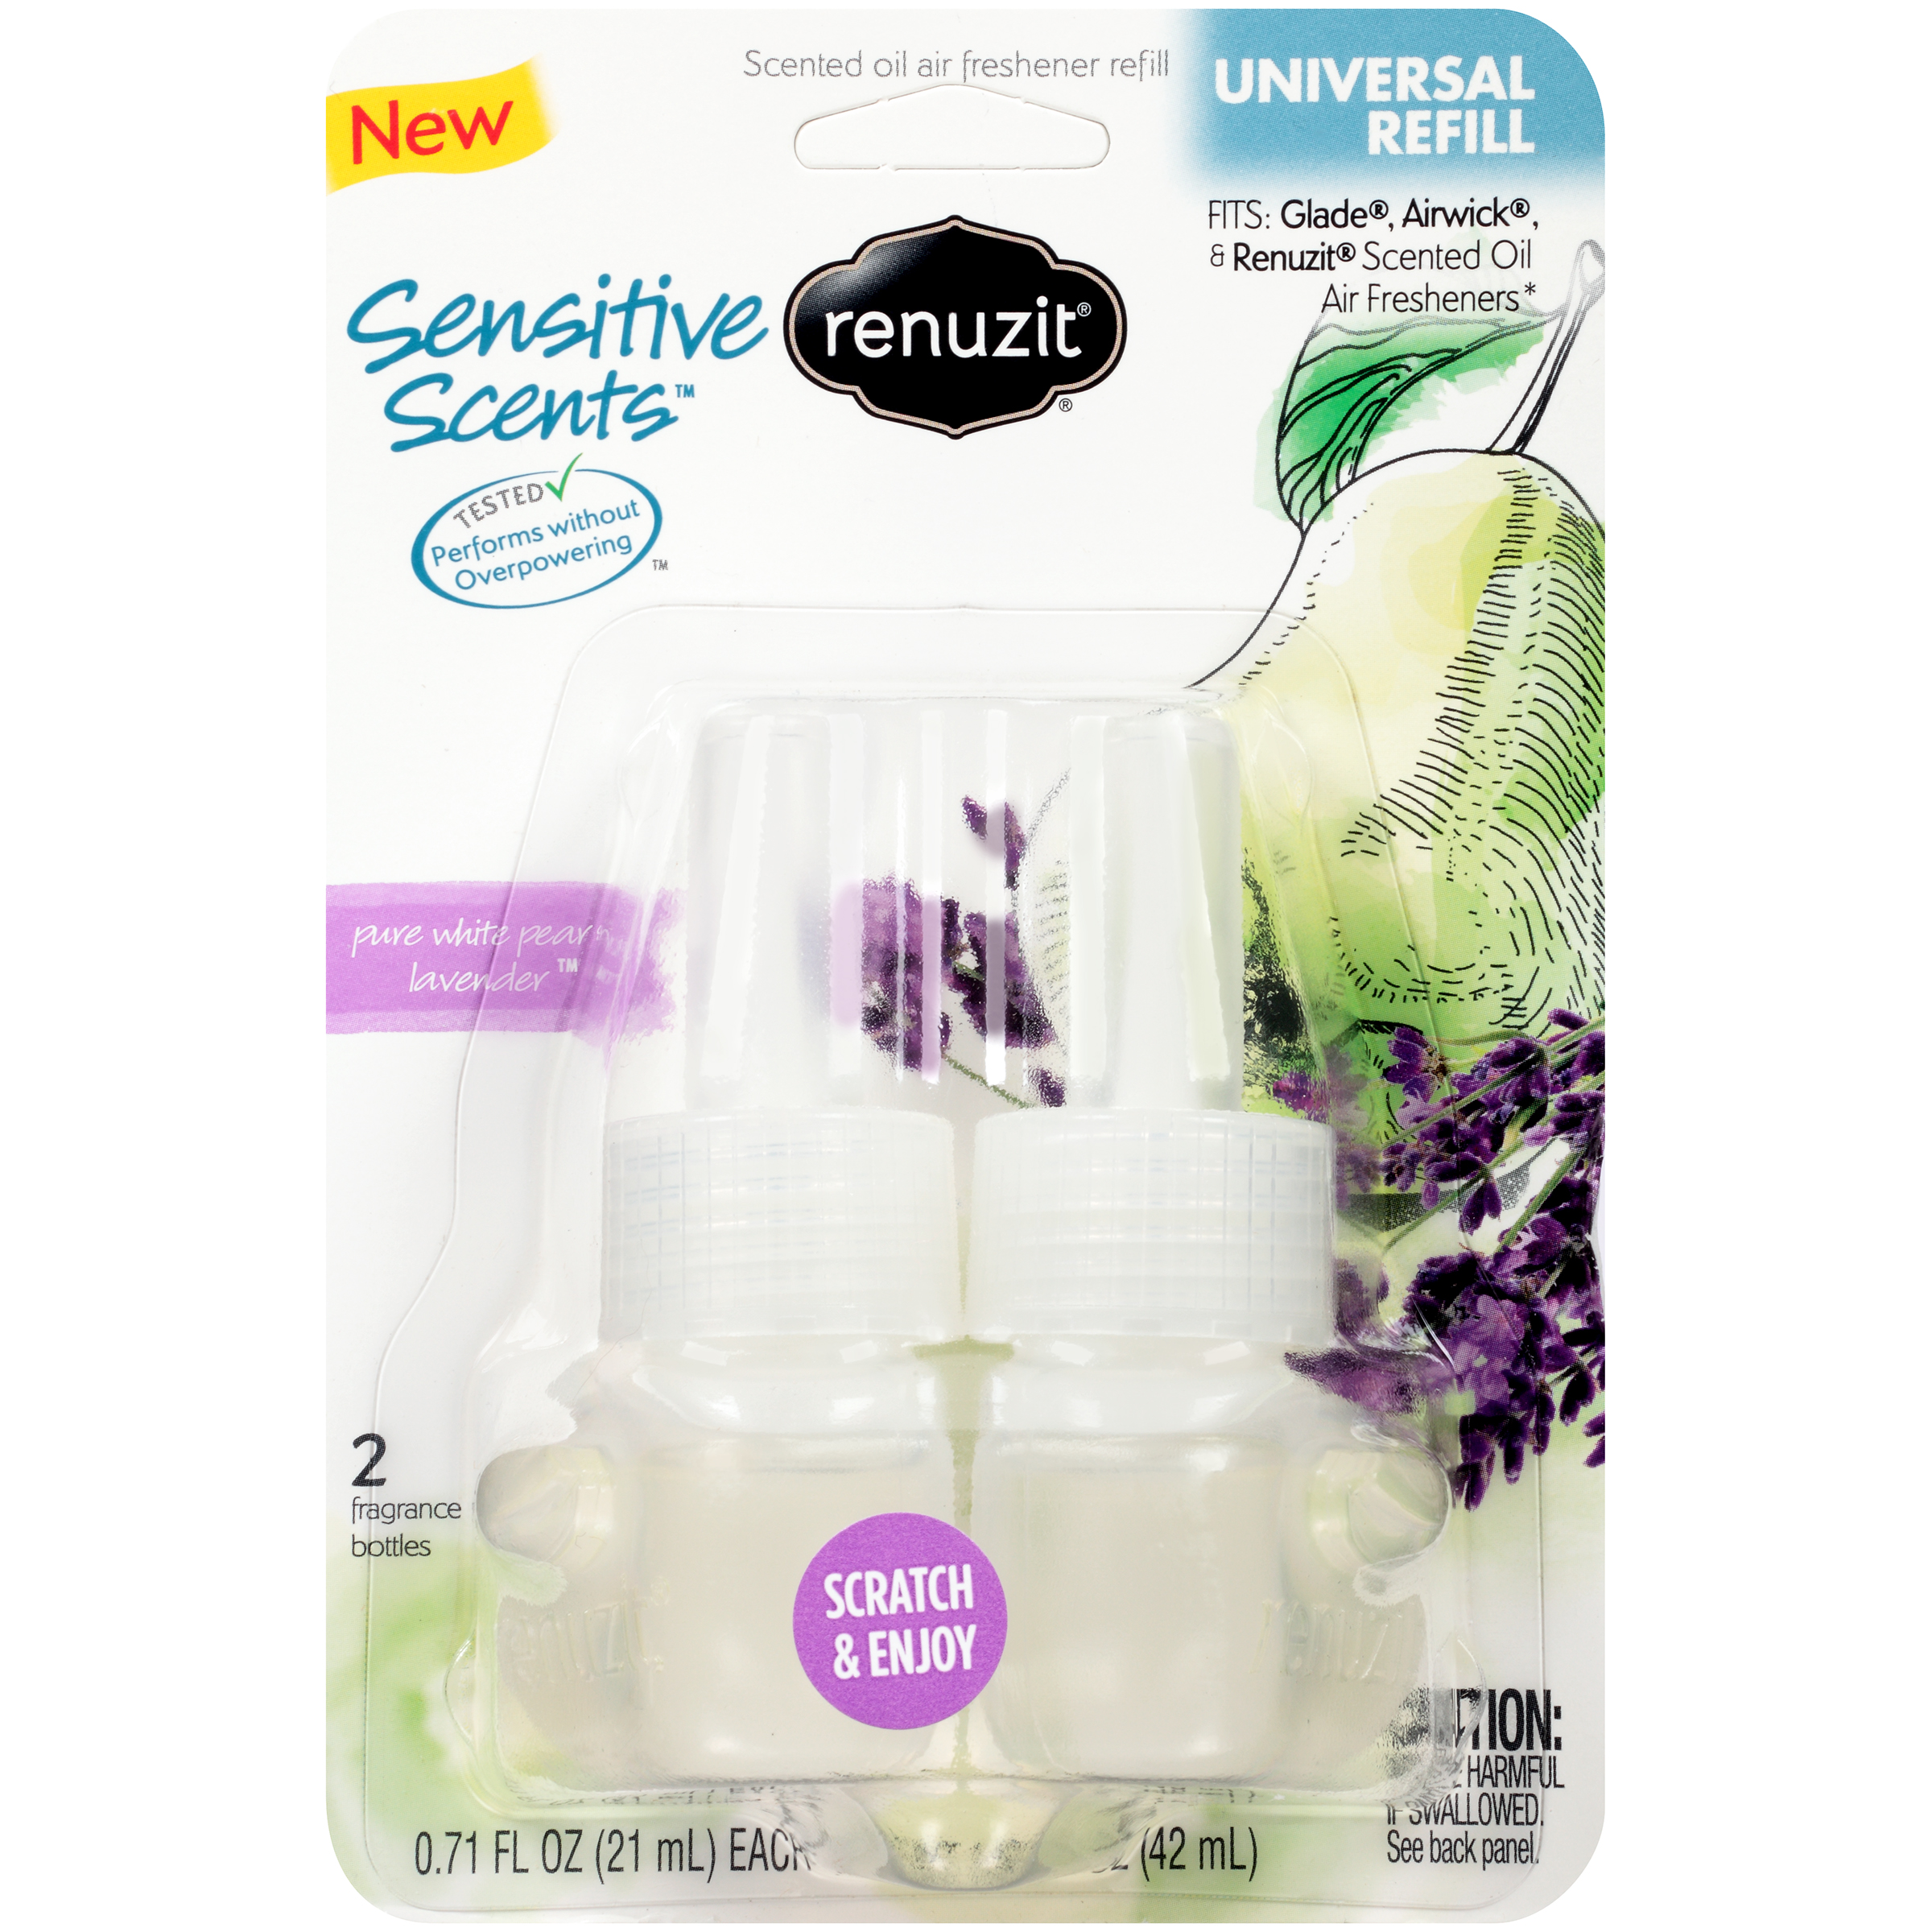 UPC 023400053728 product image for Sensitive Scents Pure White Pear & Lavender Scented Oil Air Freshener Refill 1.4 | upcitemdb.com